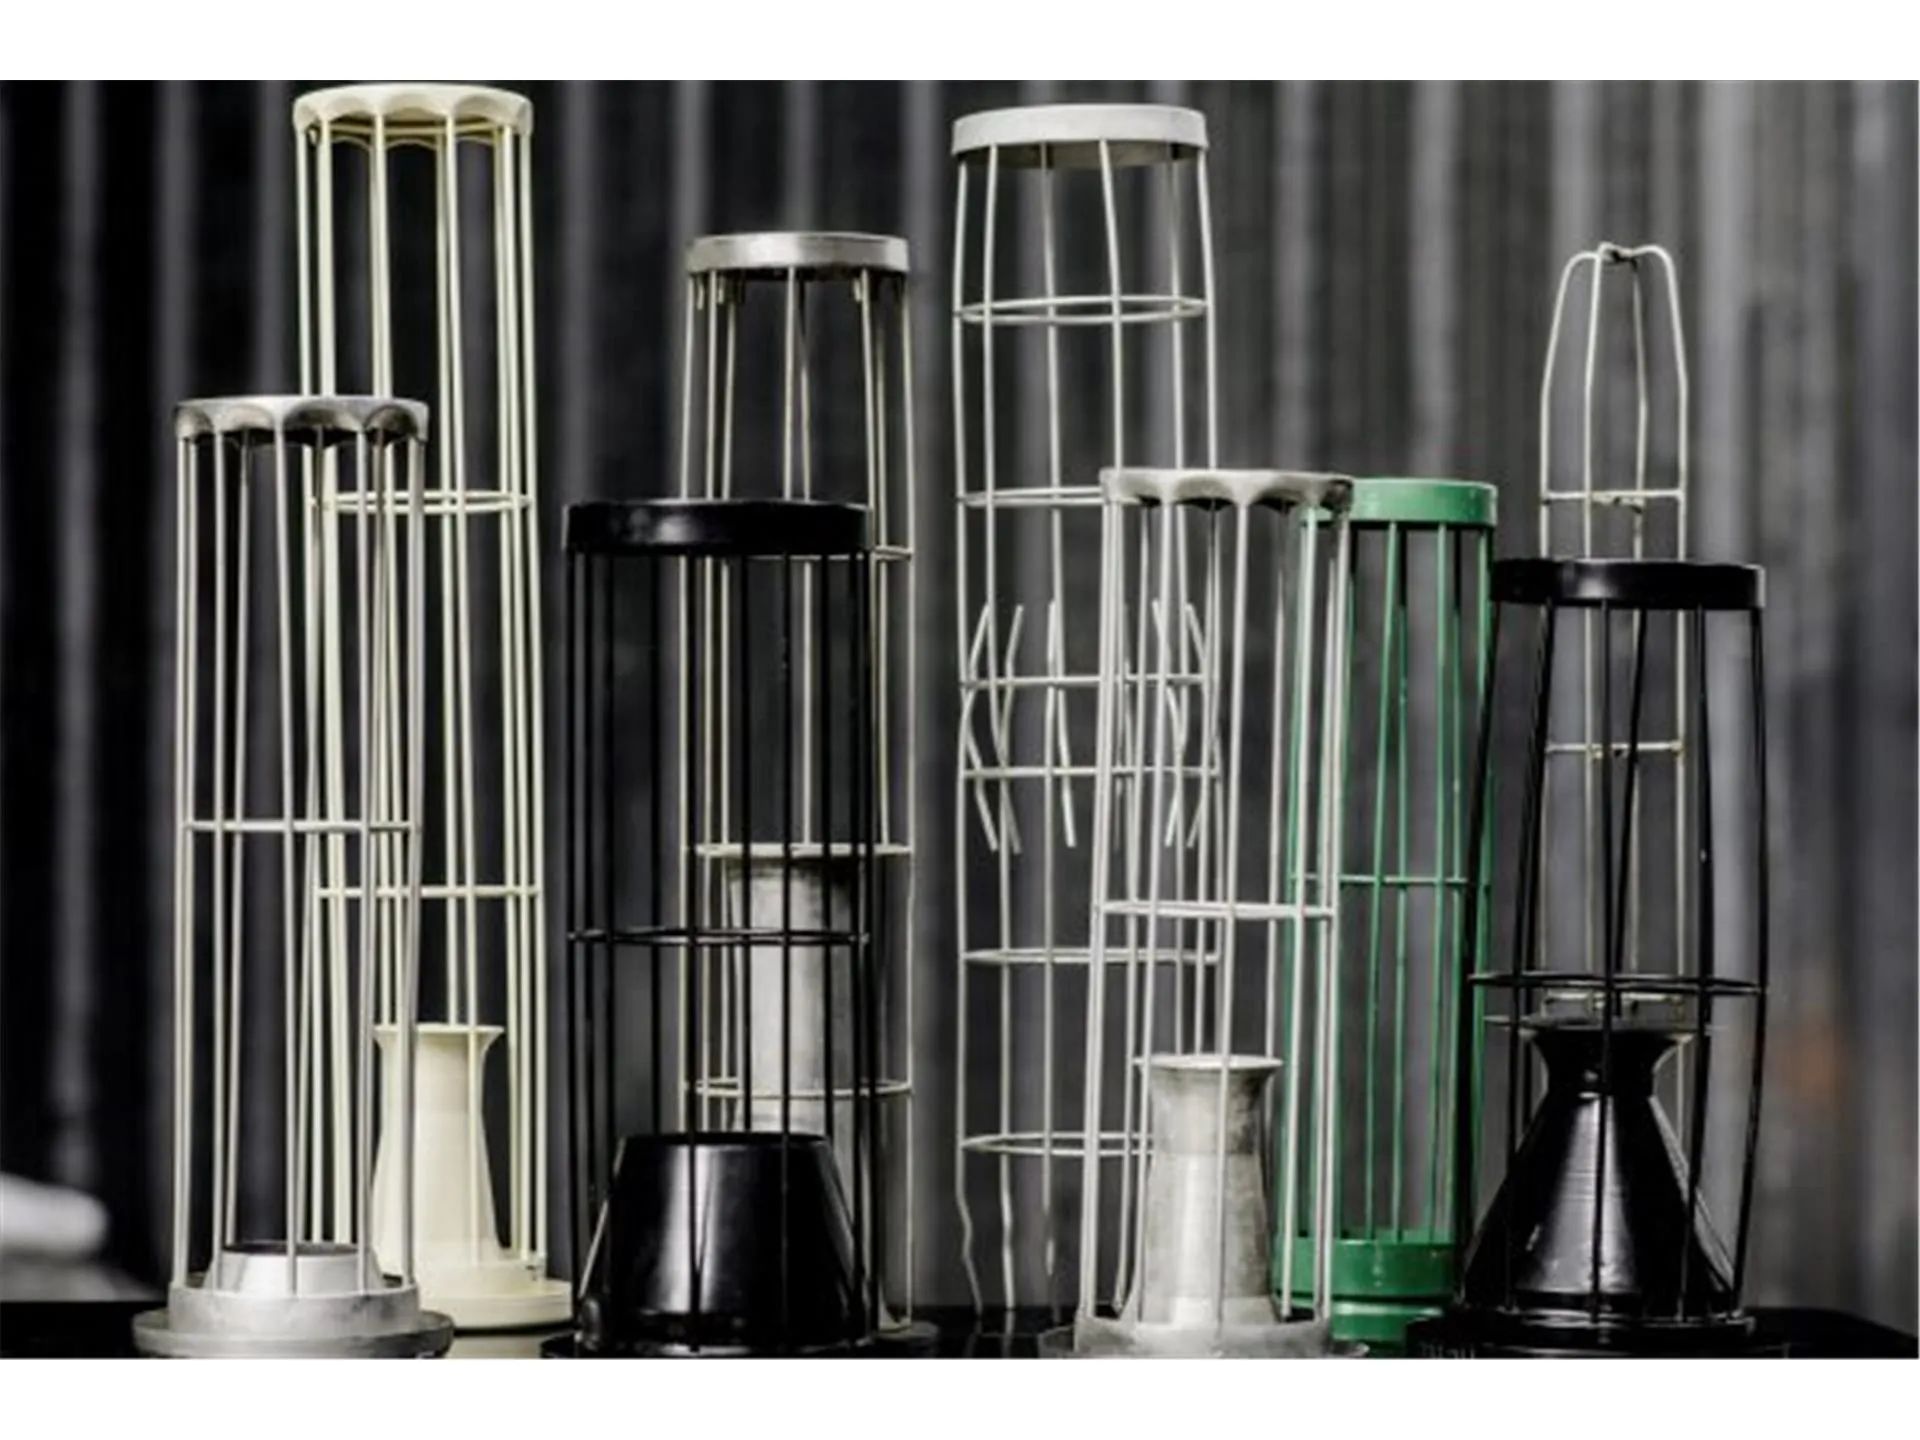 Filter Cages